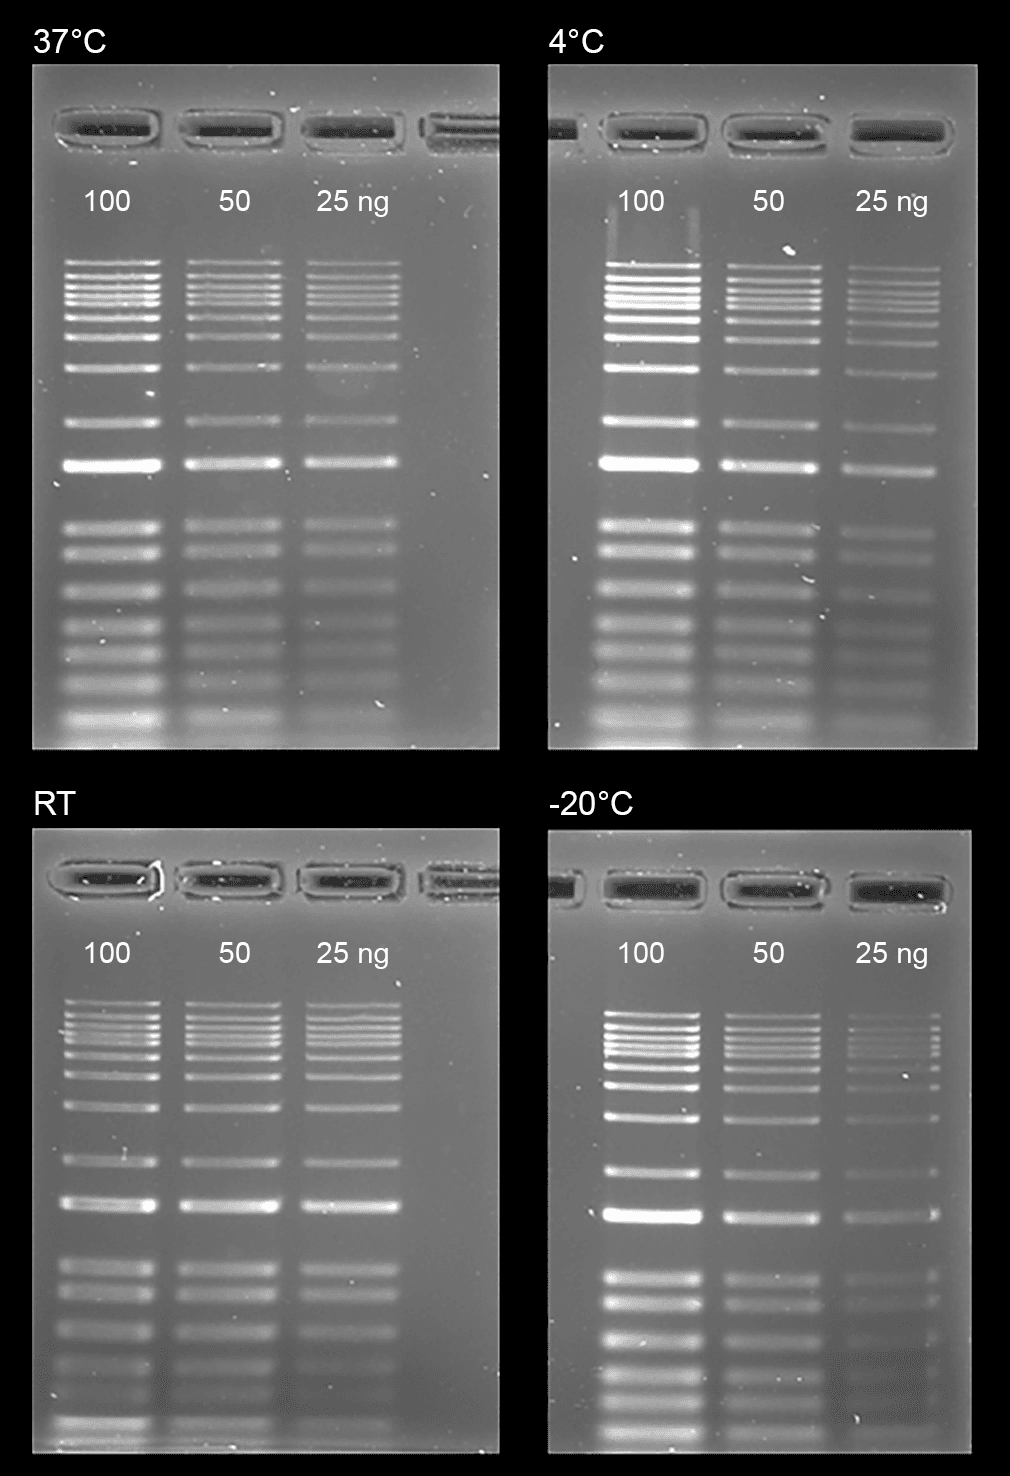 Stability test on Gelite™ Safe DNA Gel Stain, which was dissolved in DMSO and stored at four different temperatures (-20°C, 4°C, room temperature, and 37°C) for a period of one month. After storage, DNA ladders (100, 50, and 25 ng) were loaded in 1% agarose gel for 60 minutes at 75 V. Gels were incubated with Gelite™ Safe DNA Gel Stain for 1 hour. The image was captured in SYBR green filter set (Exposure time= 1.5 sec).